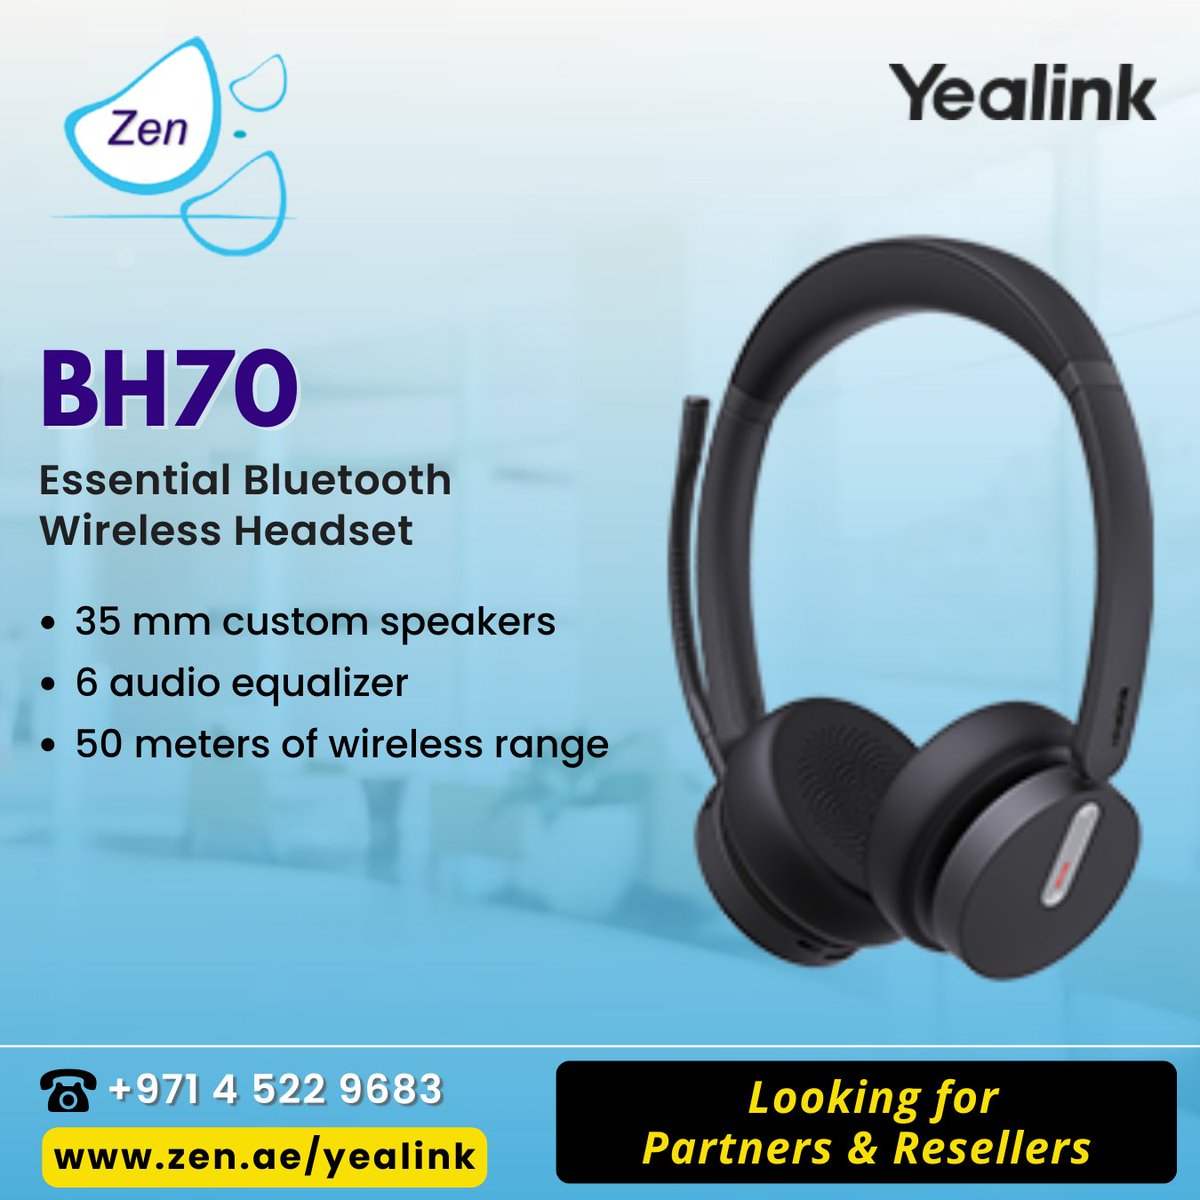 #yealink BH70
Essential Bluetooth Wireless Headset
Looking for partners & resellers.

smpl.is/8l1an

#3cx #zenitdxb #zenit #businesscommunication #dubaistartup #3cxhosting #simhosting #saudistartups